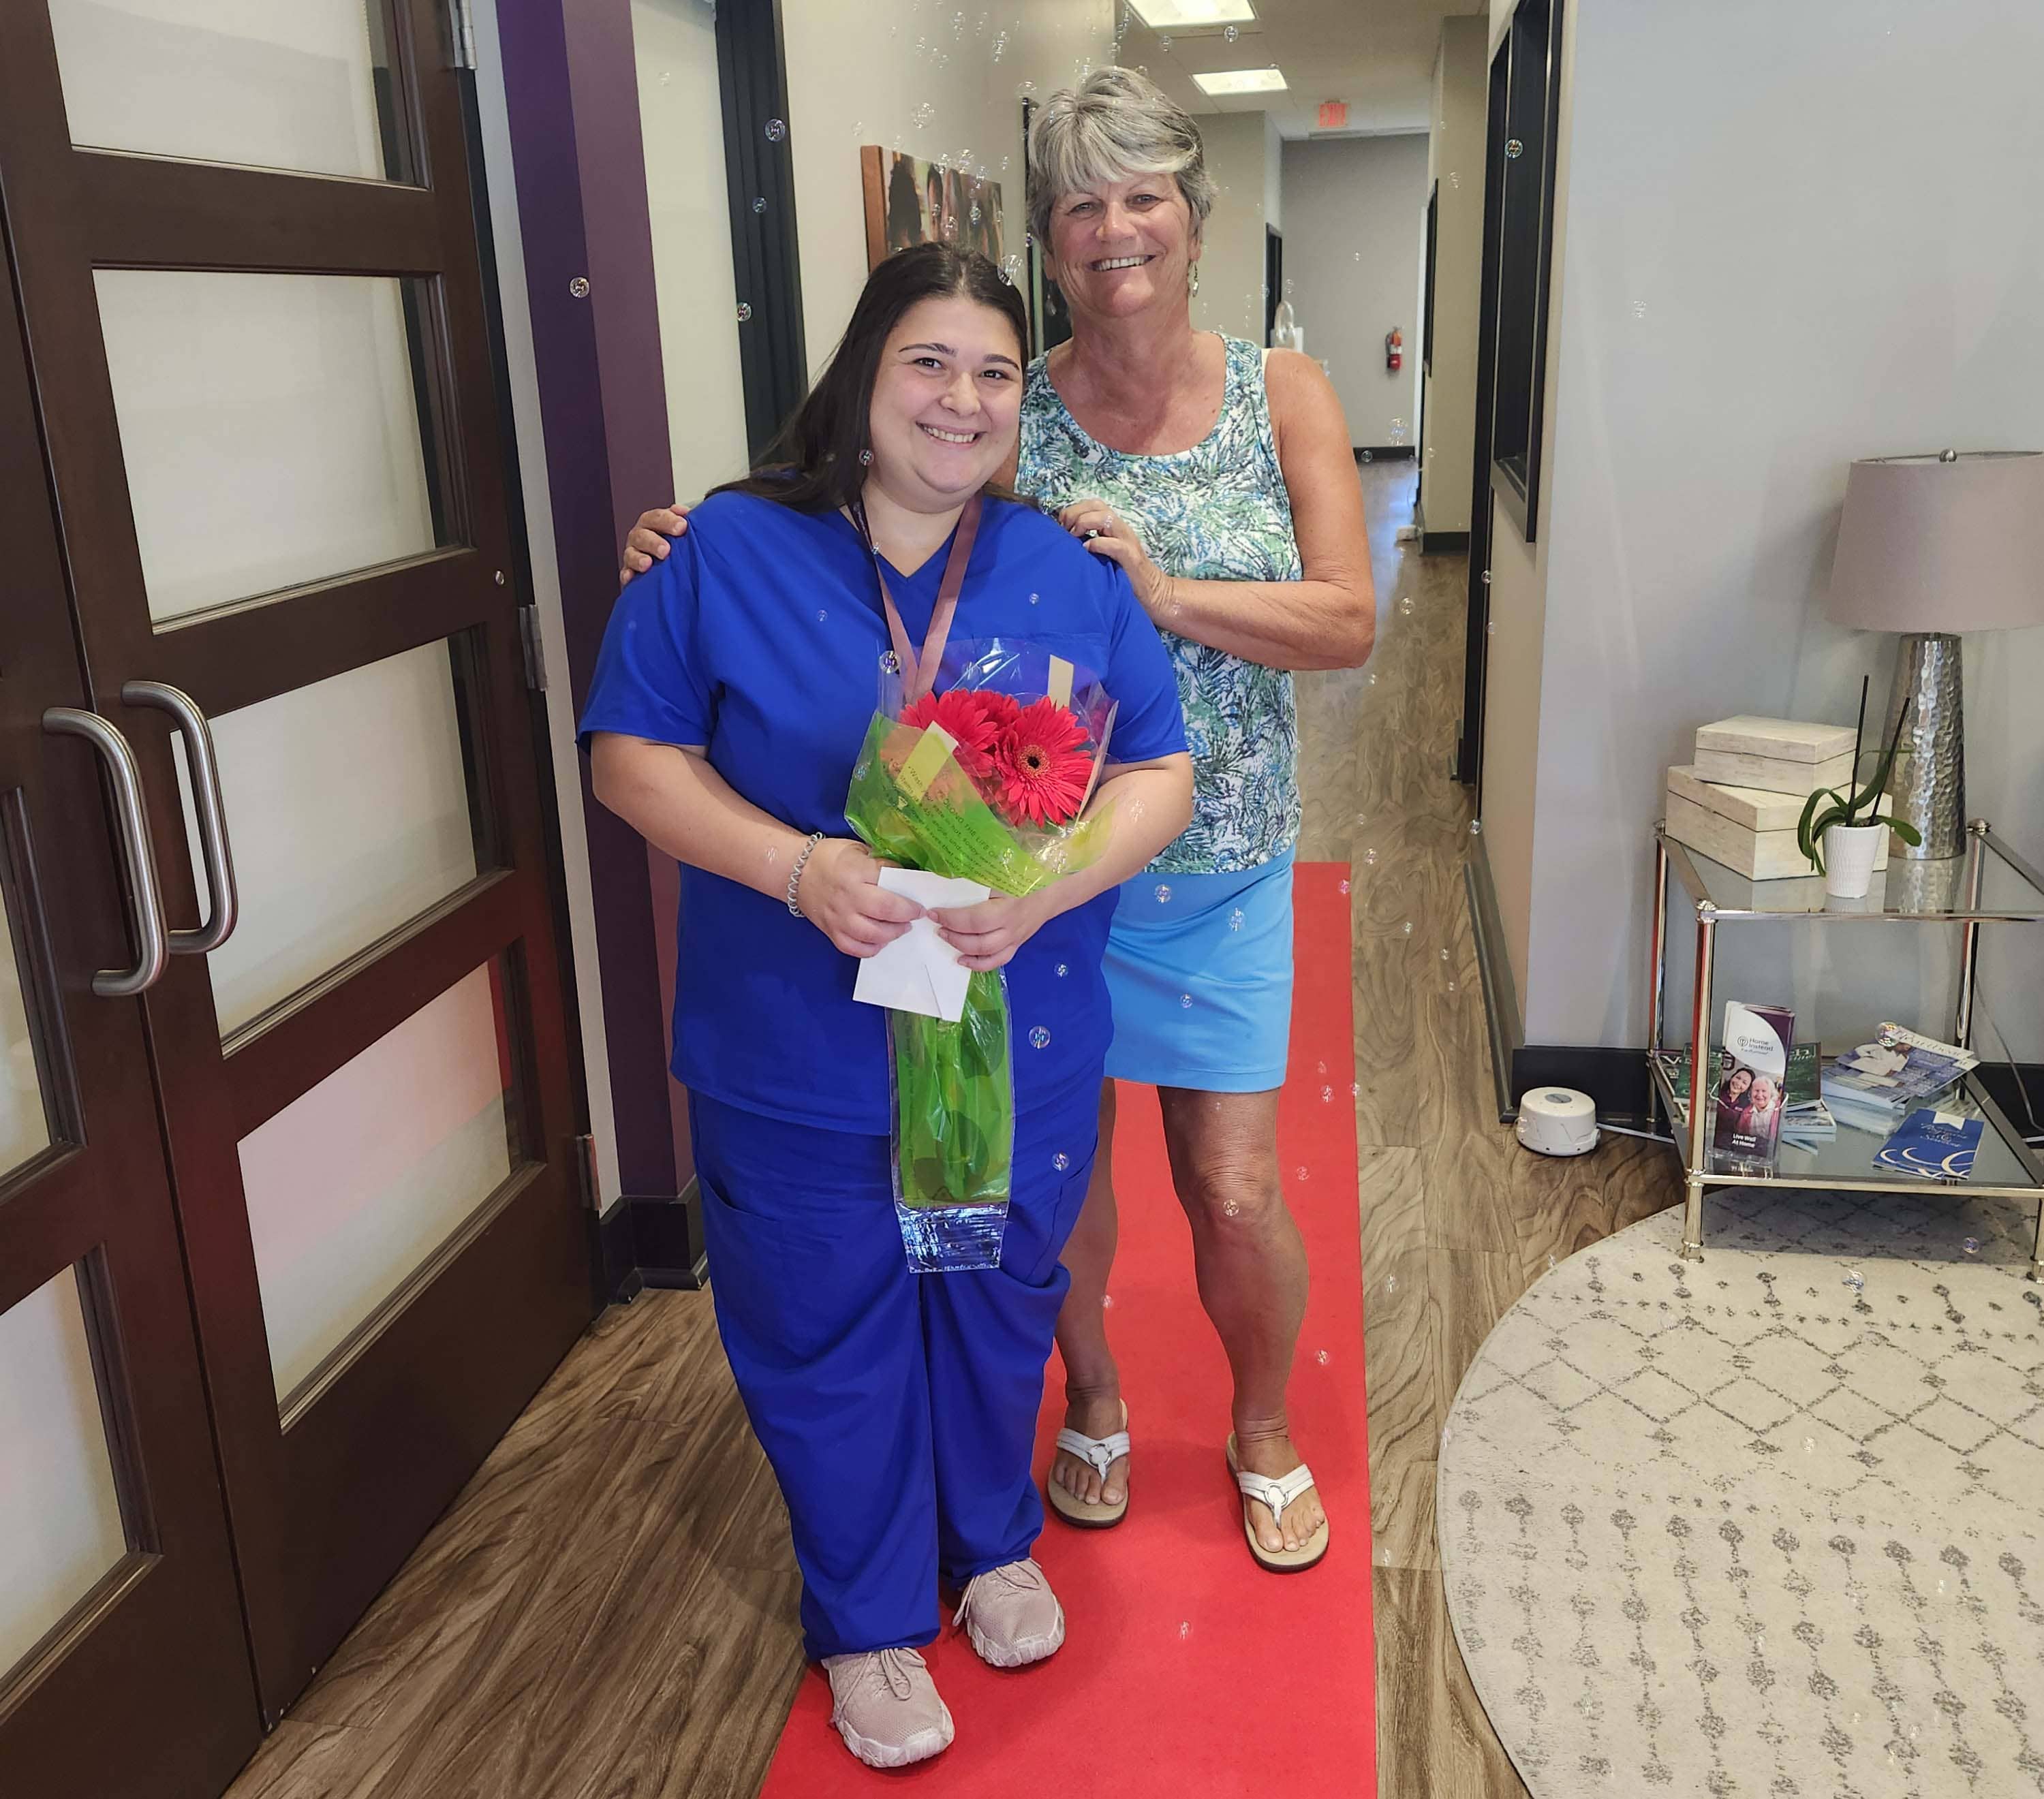 Newest Care Professional Samantha with Nurse Kathy walking the Red Carpet 1 